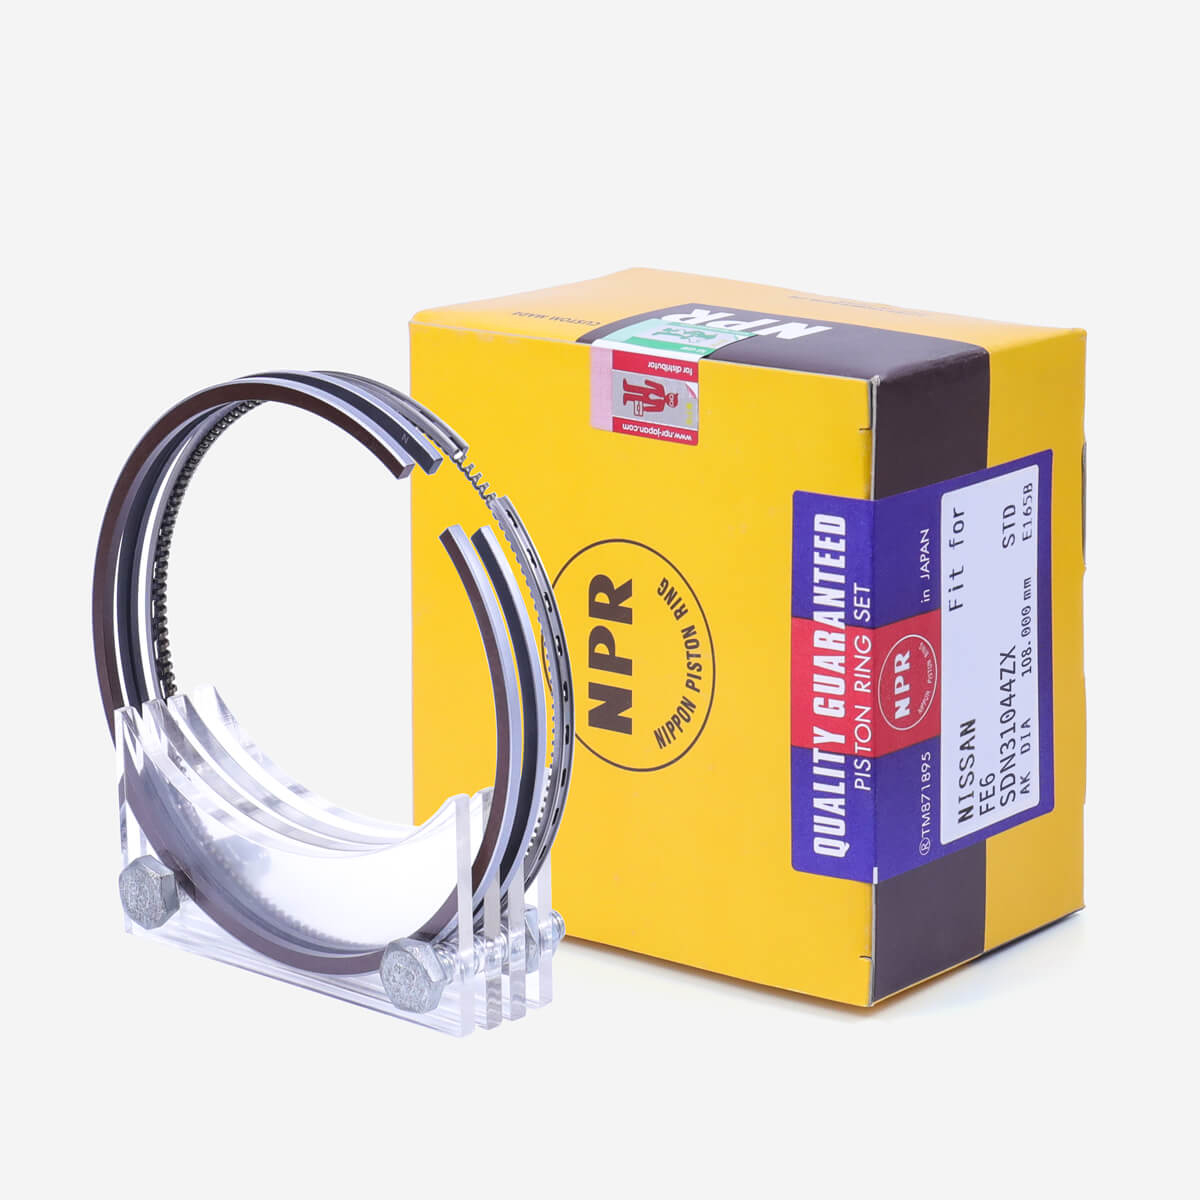 NPR FE6 Engine Piston Rings OEM:SDN31044ZX for NISSAN |TospinoMall 